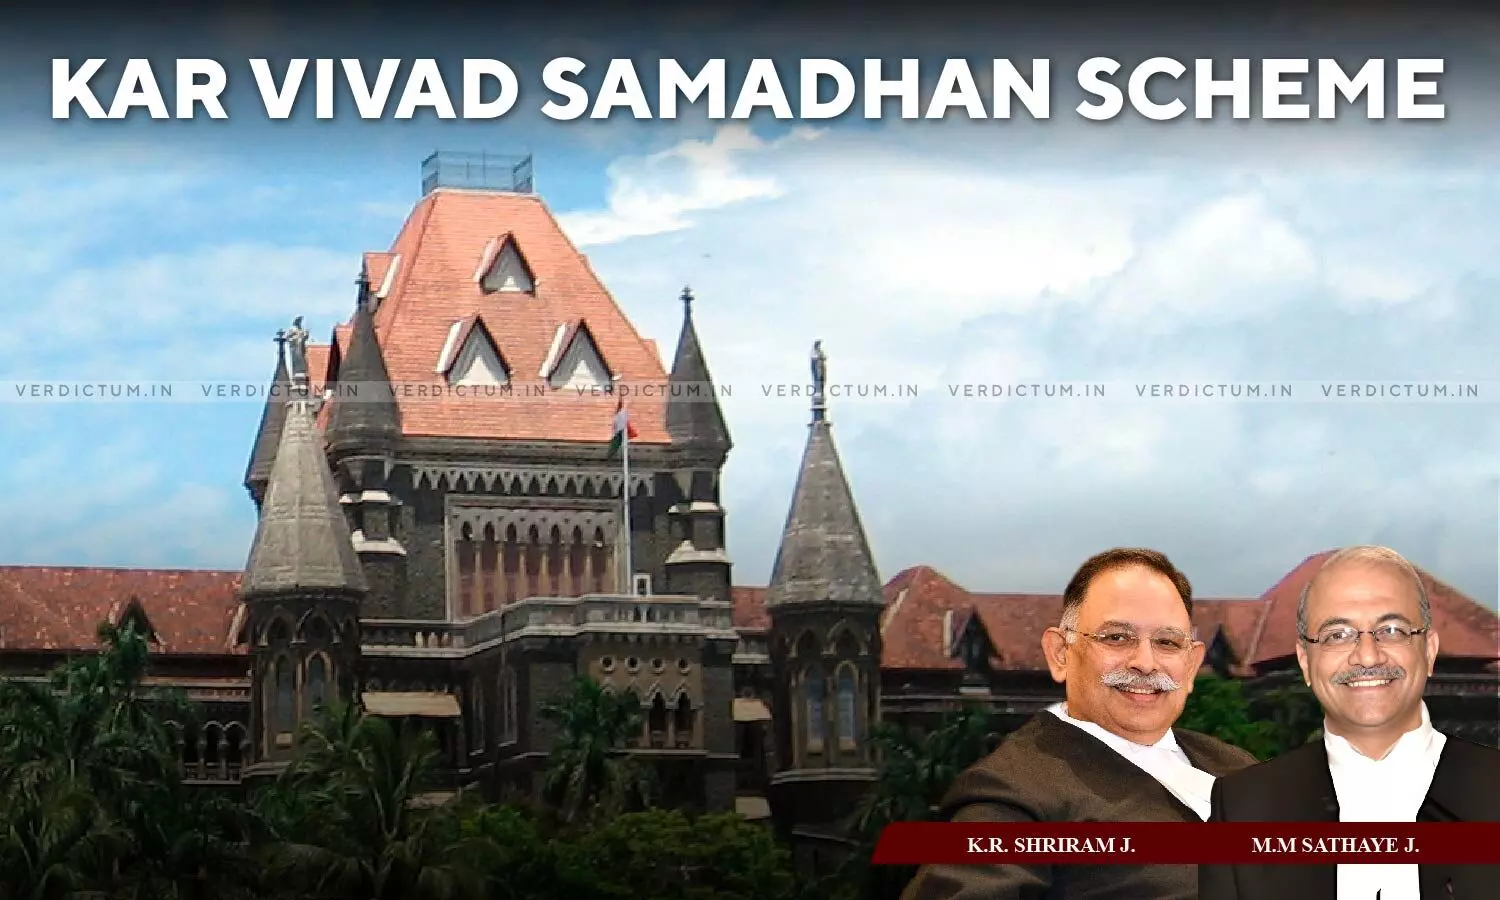 AO Has No Jurisdiction To Reopen Assessment Once Tax Arrears Are Determined And Paid By Taxpayer Under KVSS: Bombay HC